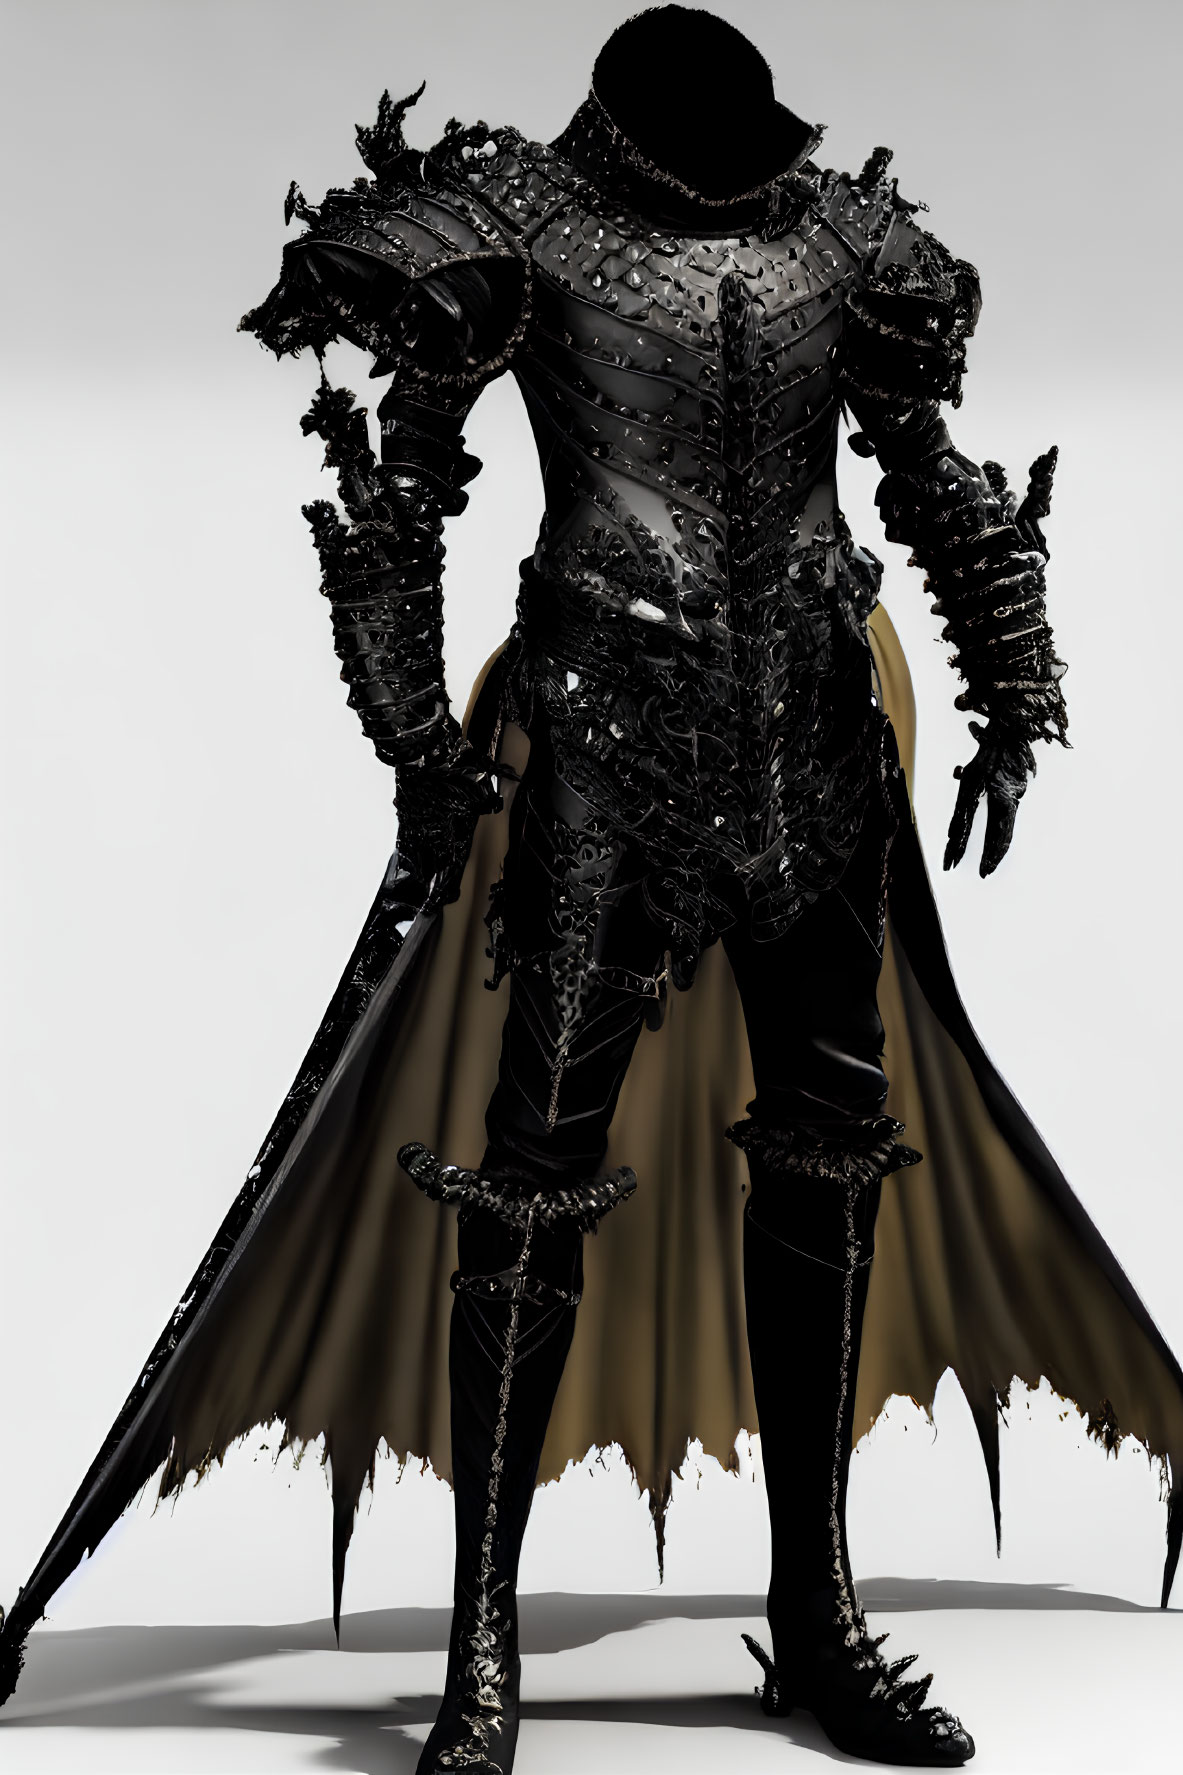 Ornate Black Armor with Sharp Edges and Flowing Cape